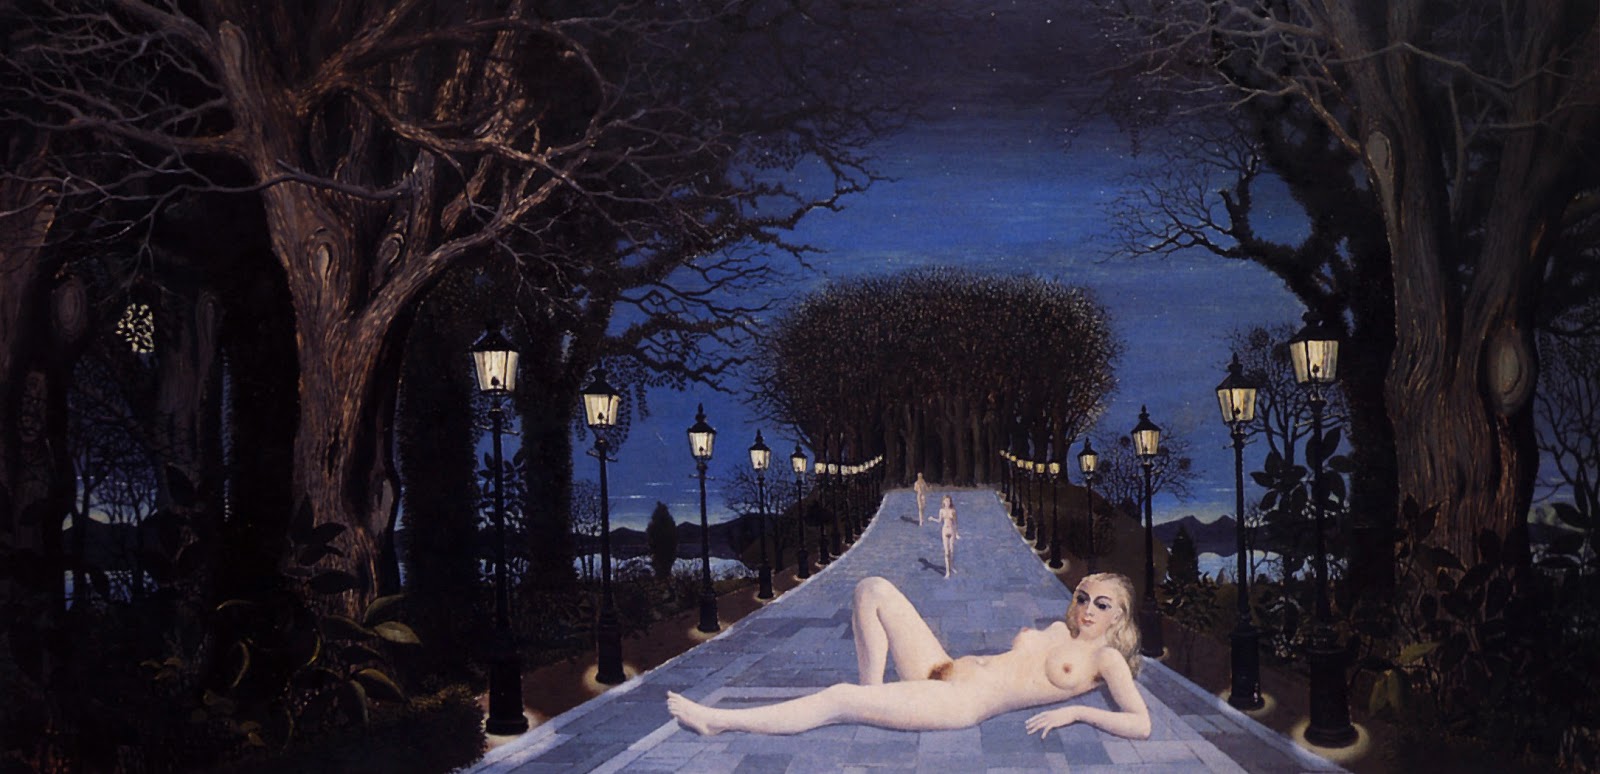 Paul Delvaux: the Stuff that Dreams are Made of